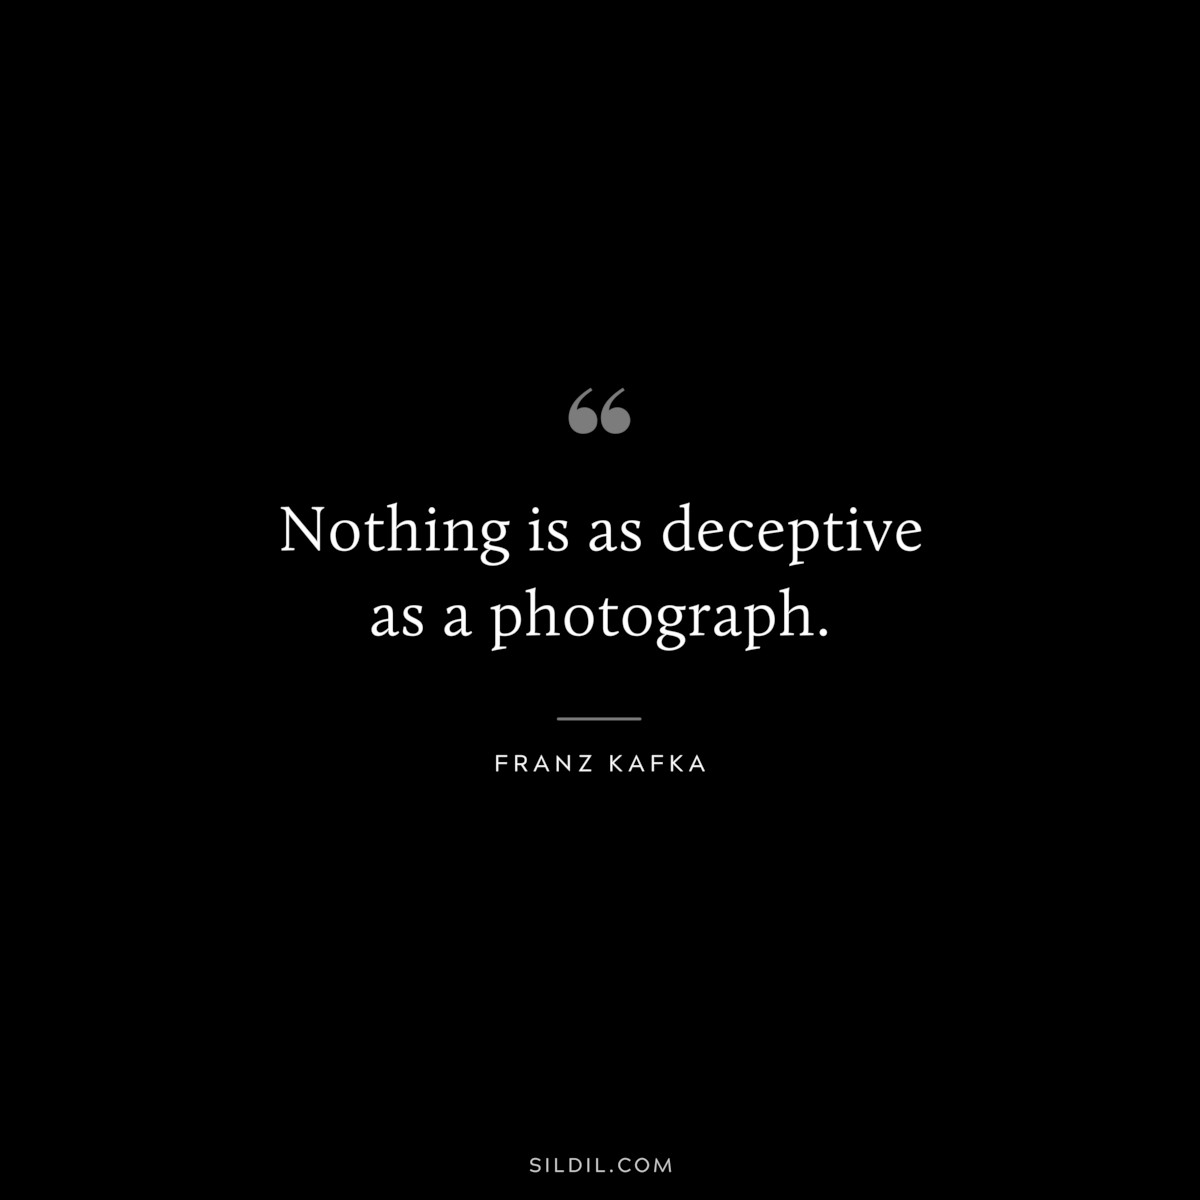 Nothing is as deceptive as a photograph. ― Franz Kafka